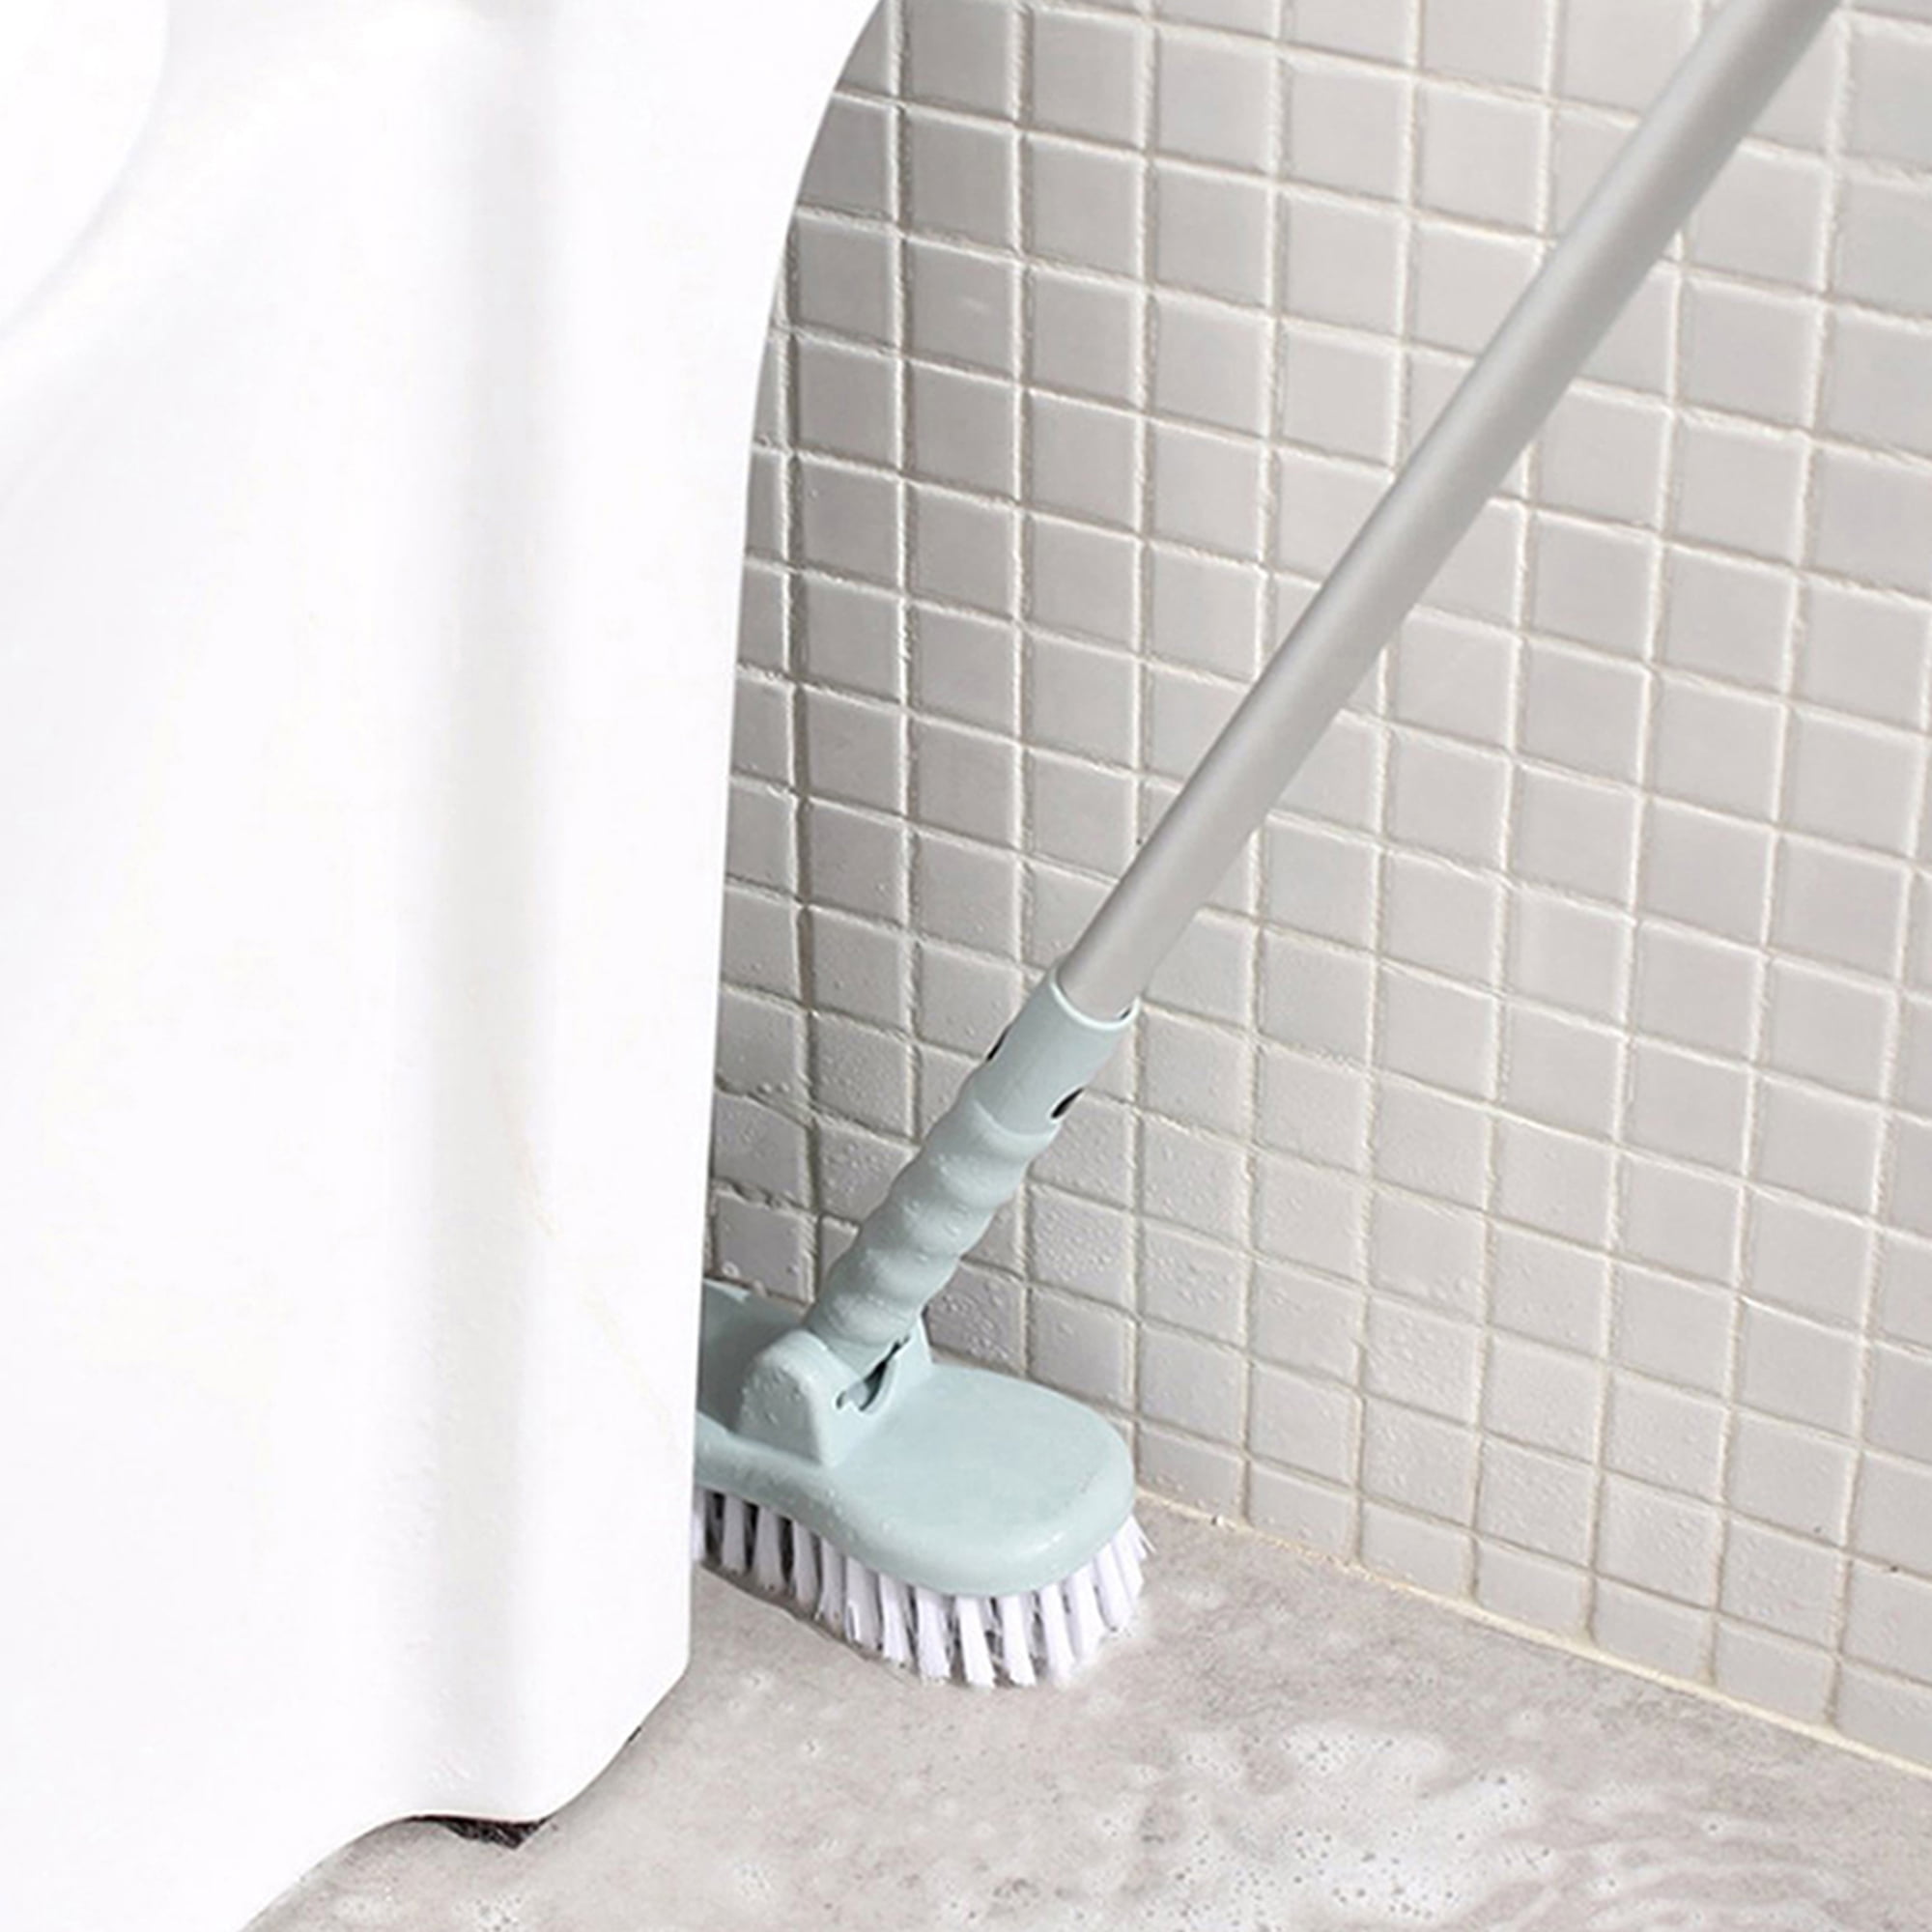 Tub Tile Scrubber Brush 2 in 1 Cleaning Brush 58.2 Adjustable Telescopic  Pole Stiff Bristles Scouring Pads Cleaning Tools